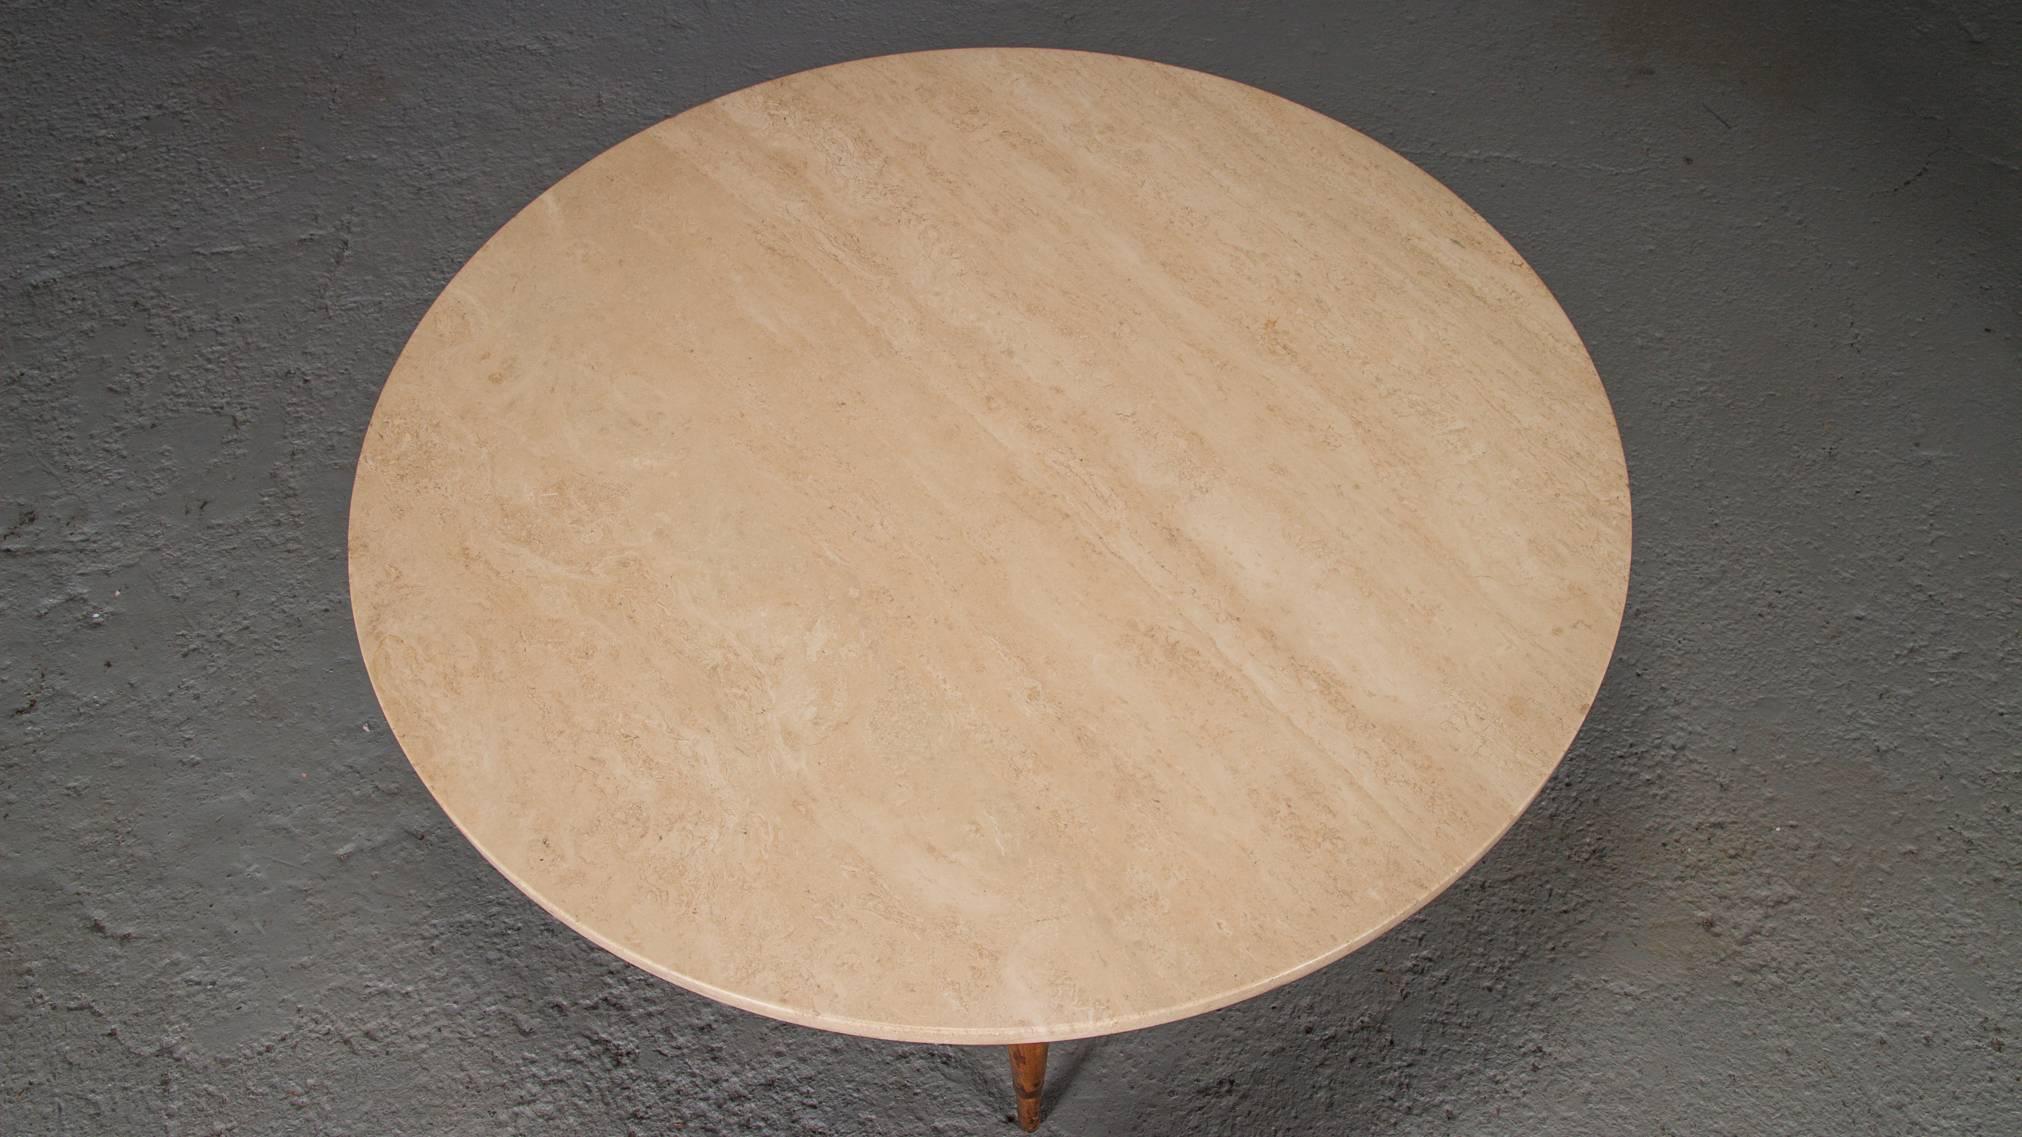 Made of travertine, walnut, and brass, this coffee or cocktail table was designed by Paul McCobb for the Conoisseur Collection.